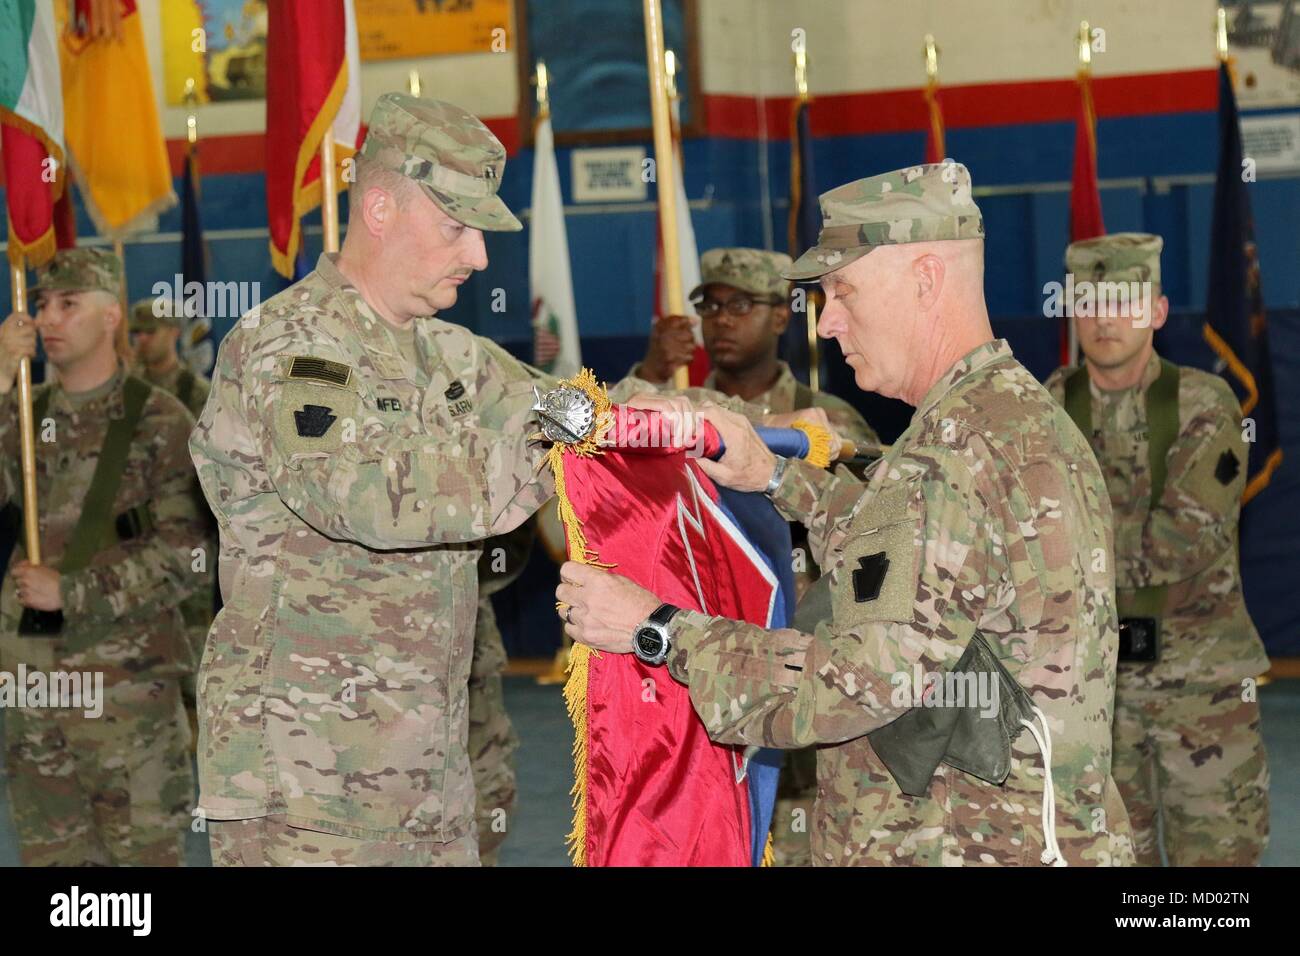 CAMP ARIFJAN, Kuwait – Maj. Gen. Andrew Schafer (left), 28th Infantry Division commanding general, and Command Sgt. Maj. John Jones unfurl the division colors during a transfer of authority ceremony March 8, 2018. The Pennsylvania Army National Guard unit’s headquarters and headquarters battalion assumed responsibility from its counterpart, the 35th Infantry Division which is comprised of soldiers from the Missouri and Kansas National Guard. The 28th’s HHBN will serve as a division headquarters for roughly 10,000 soldiers conducting theater security operations in the Middle East. (U.S. Army ph Stock Photo